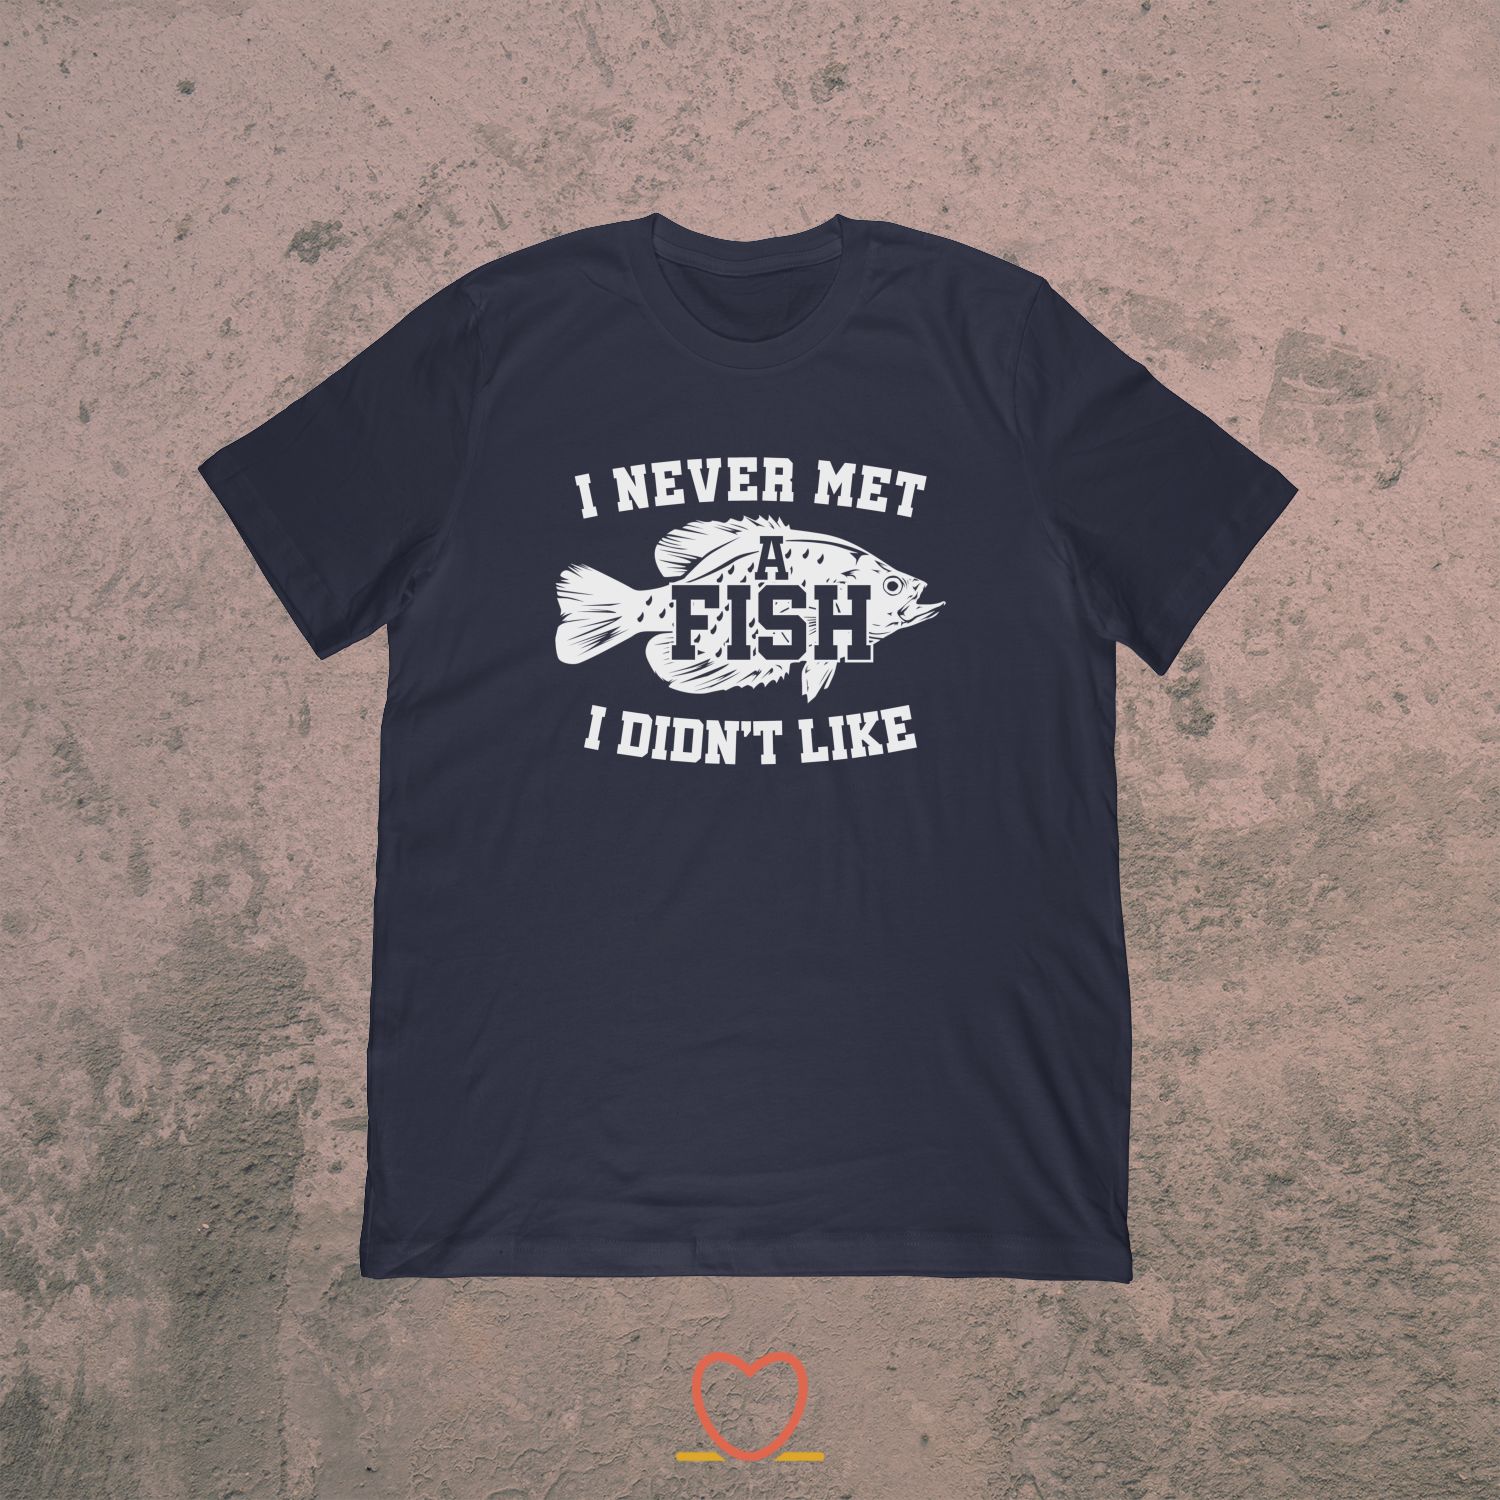 I Never Met A Fish I Didn’t Like – Funny Crappie Fishing Tee